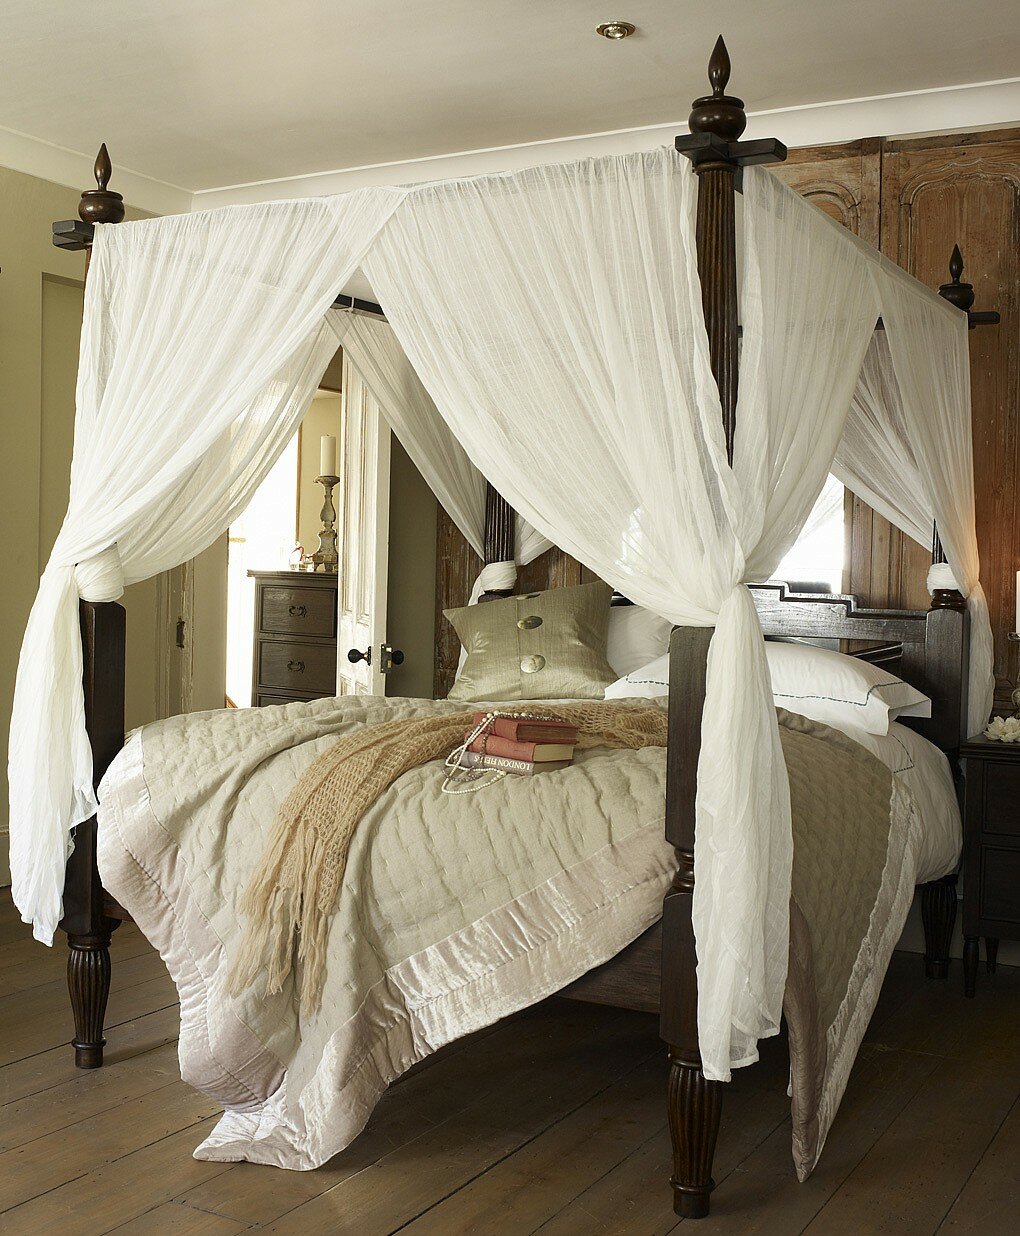 Buy Canopy Bed Curtains | Drapes for Four Poster Bed | Canopy Bed Curtains